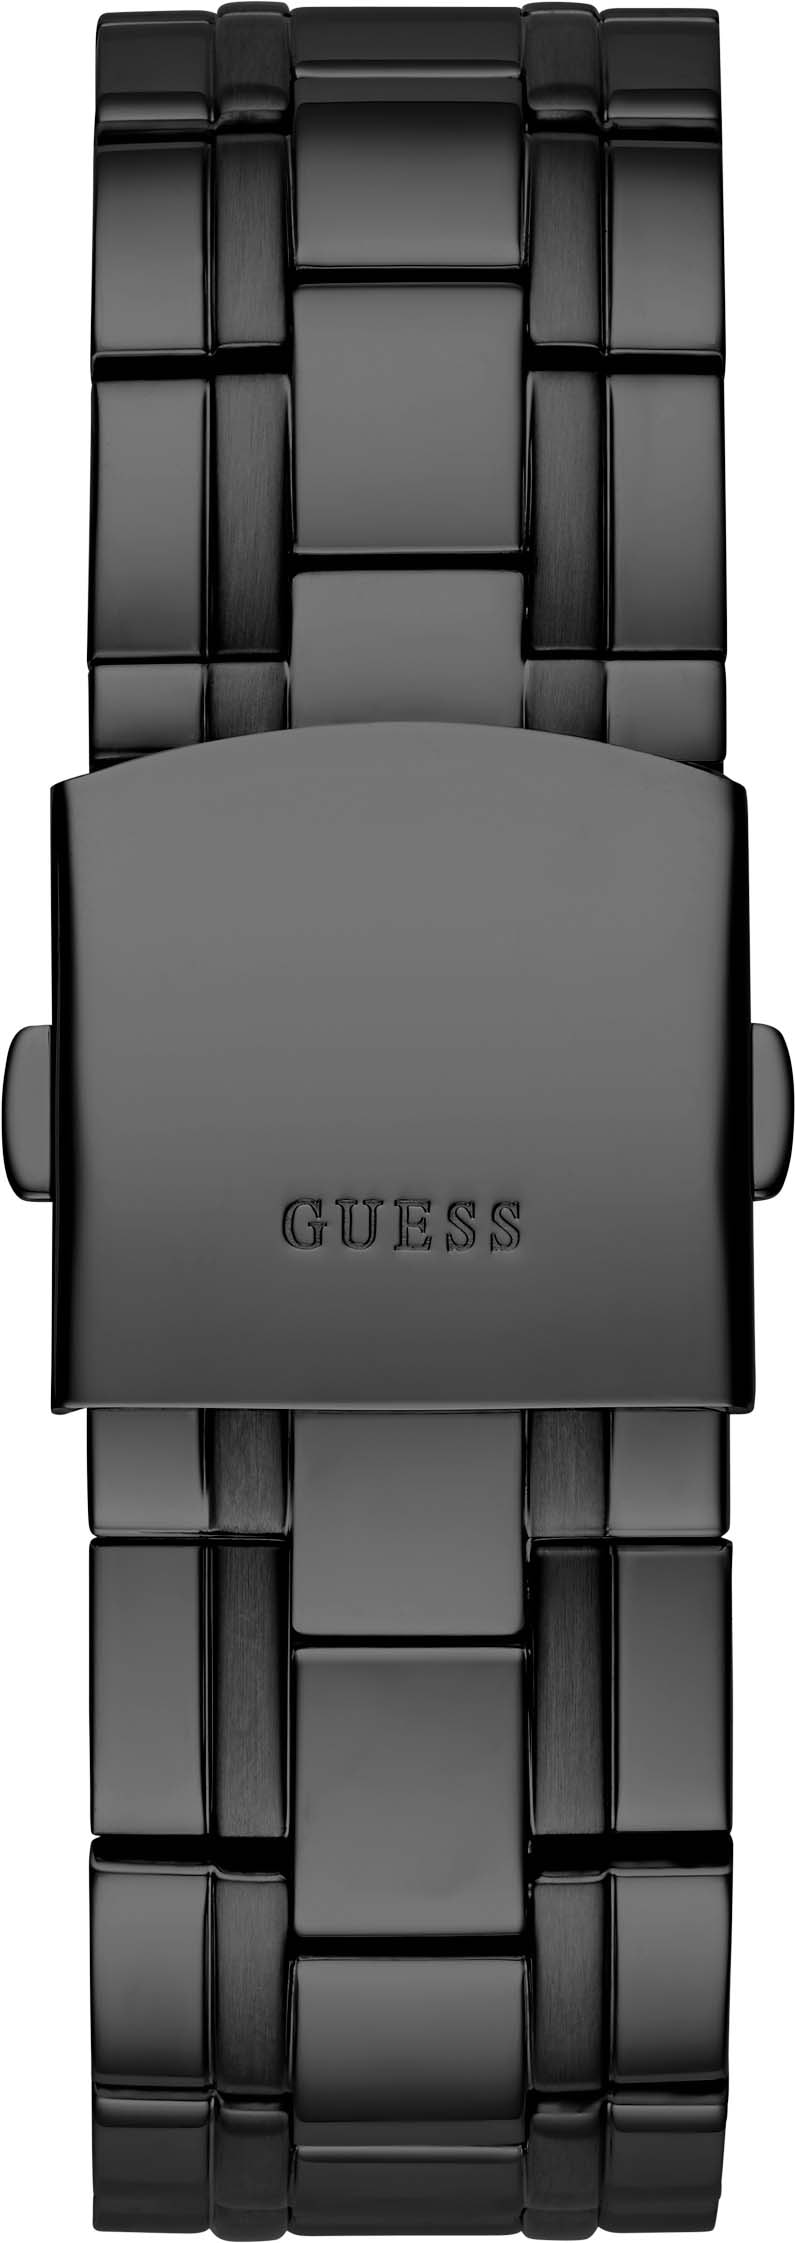 Guess Multifunktionsuhr »GW0490G3«